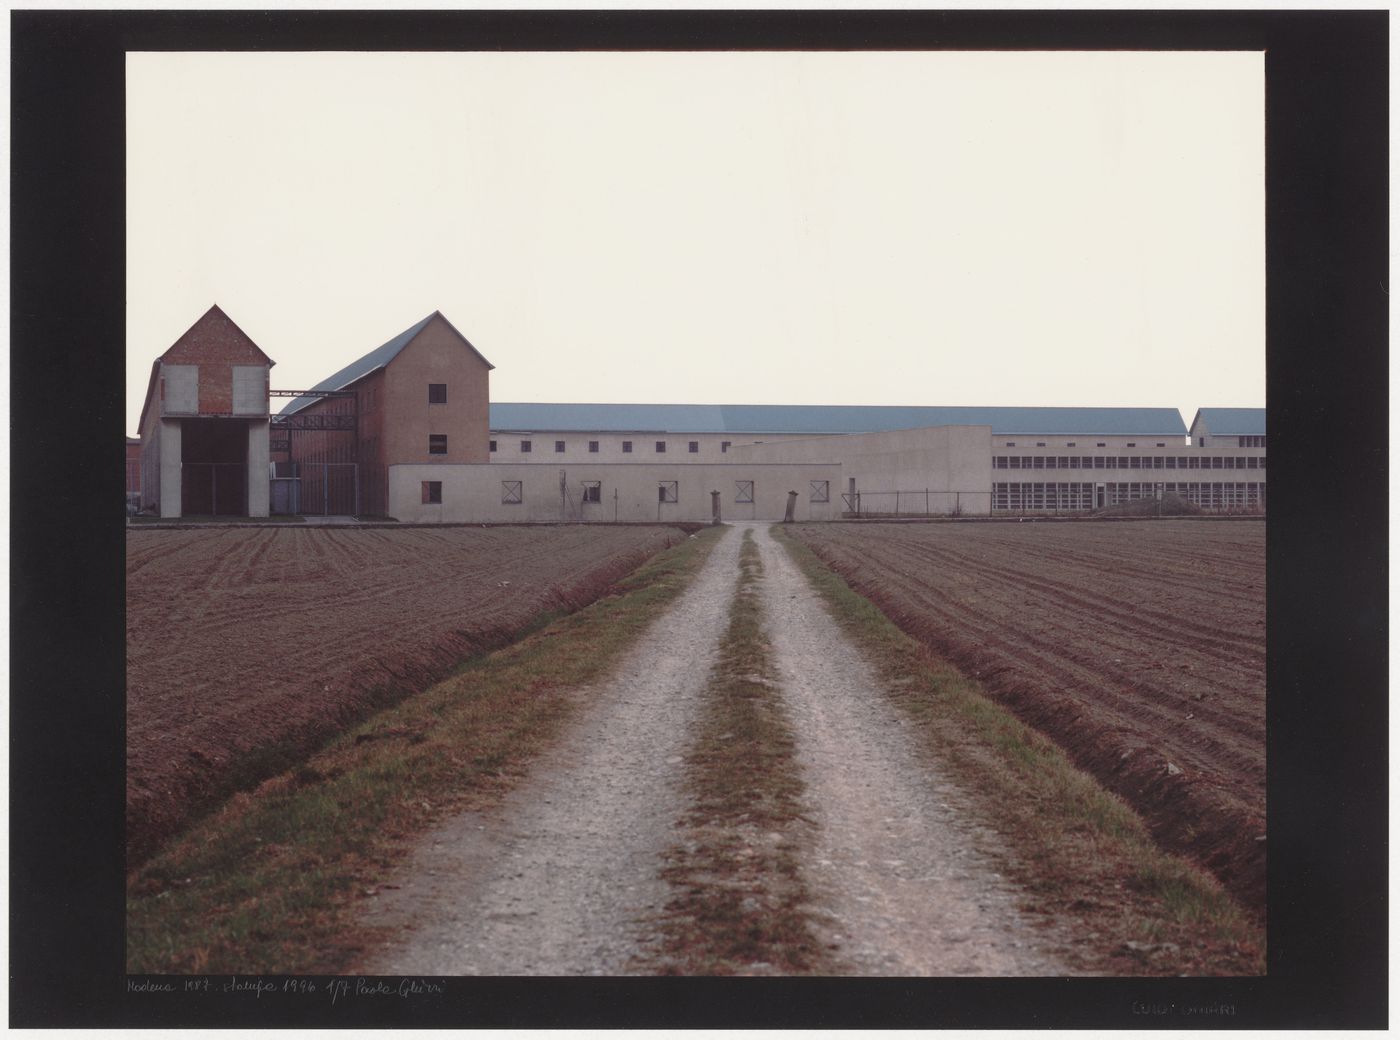 Cemetery of San Cataldo, Modena, 1971 to 1978; General view of the executed part